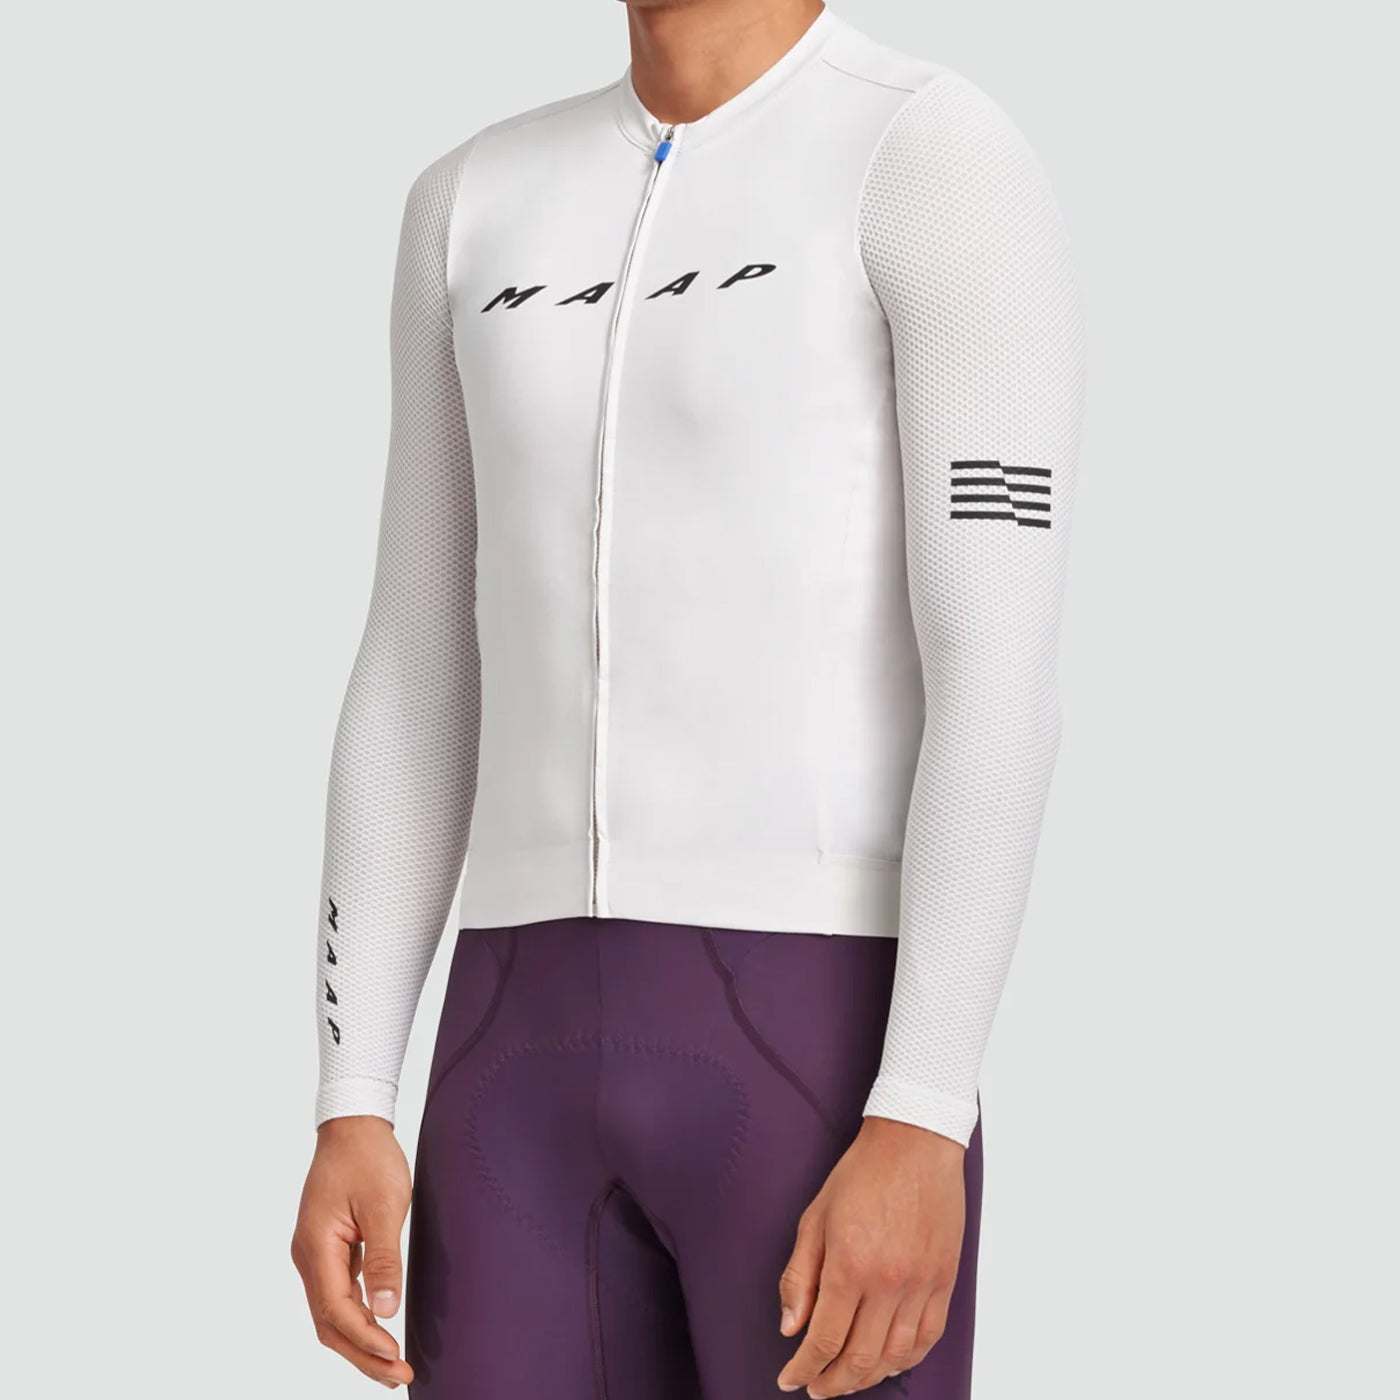 Maap Evade Pro Base 2.0 long sleeve jersey - White | All4cycling